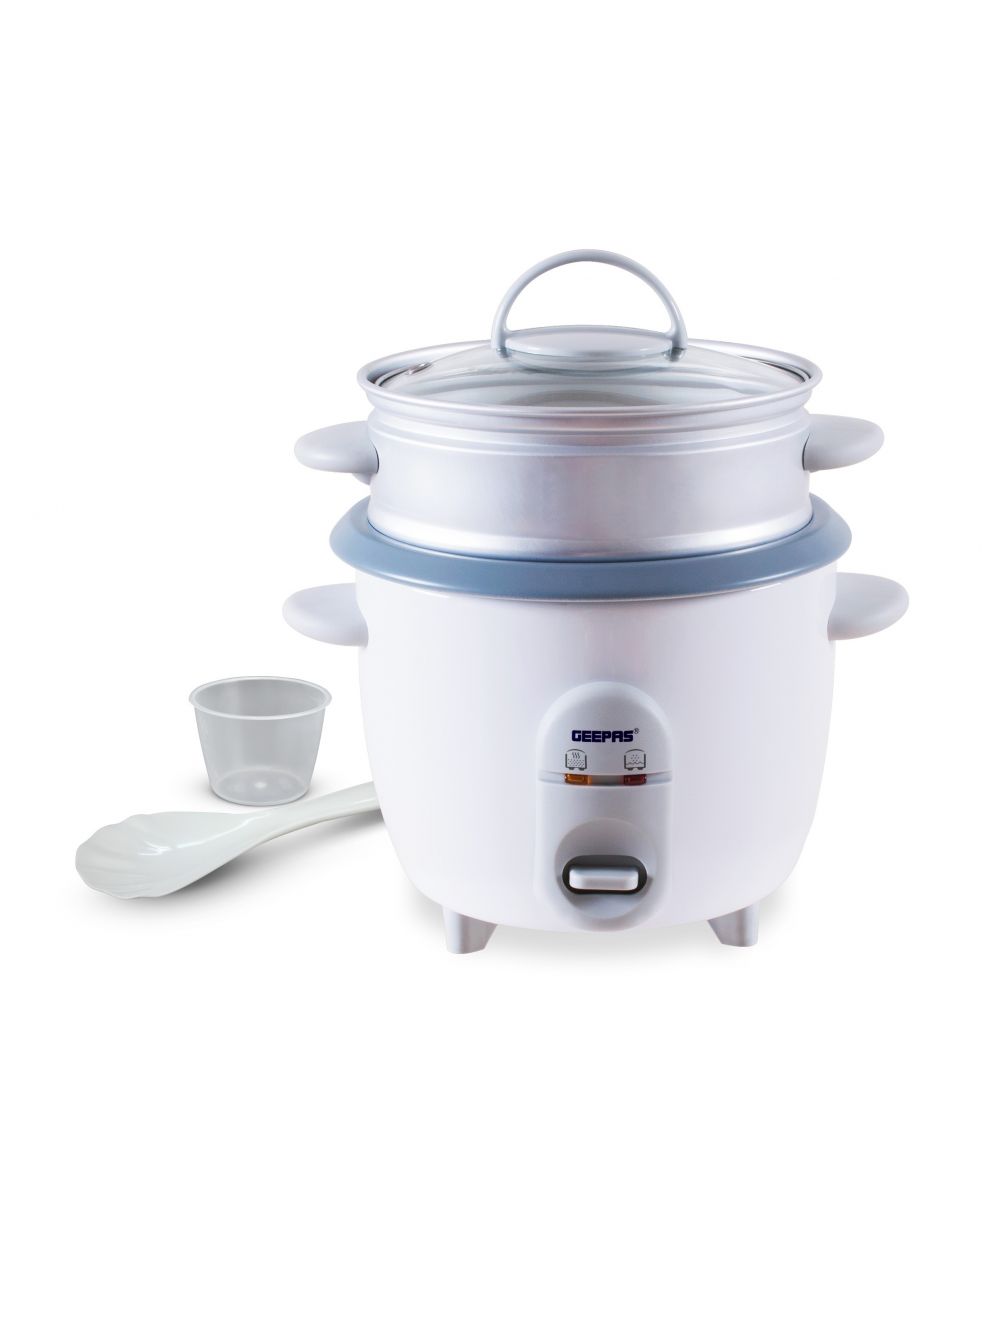 Geepas 0.9 Litres Electric Rice Cooker, GRC1828